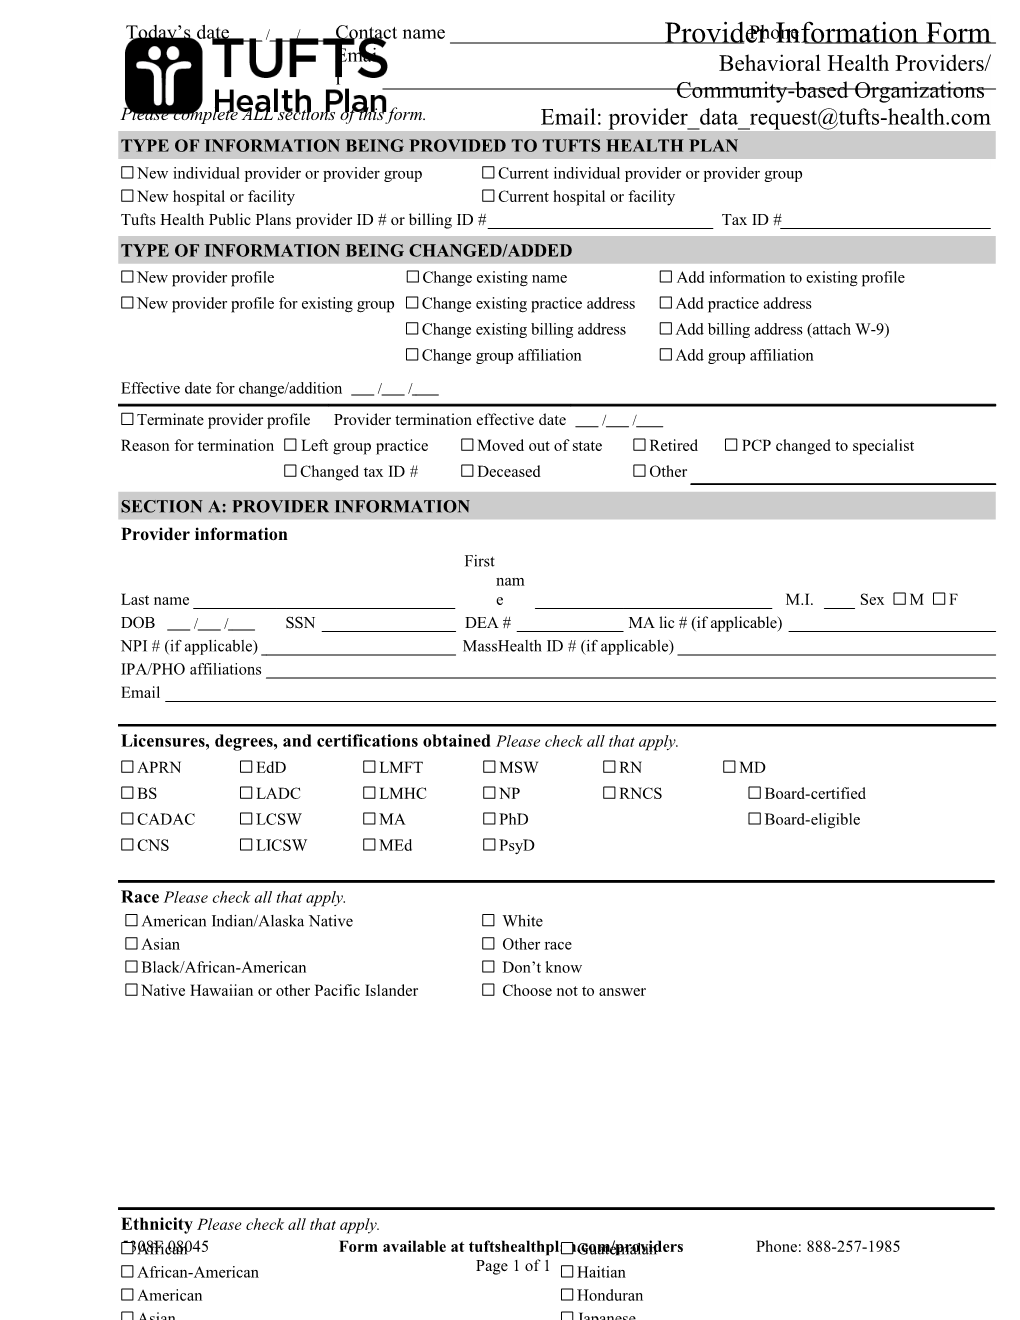 Please Complete ALL Sections of This Form s2